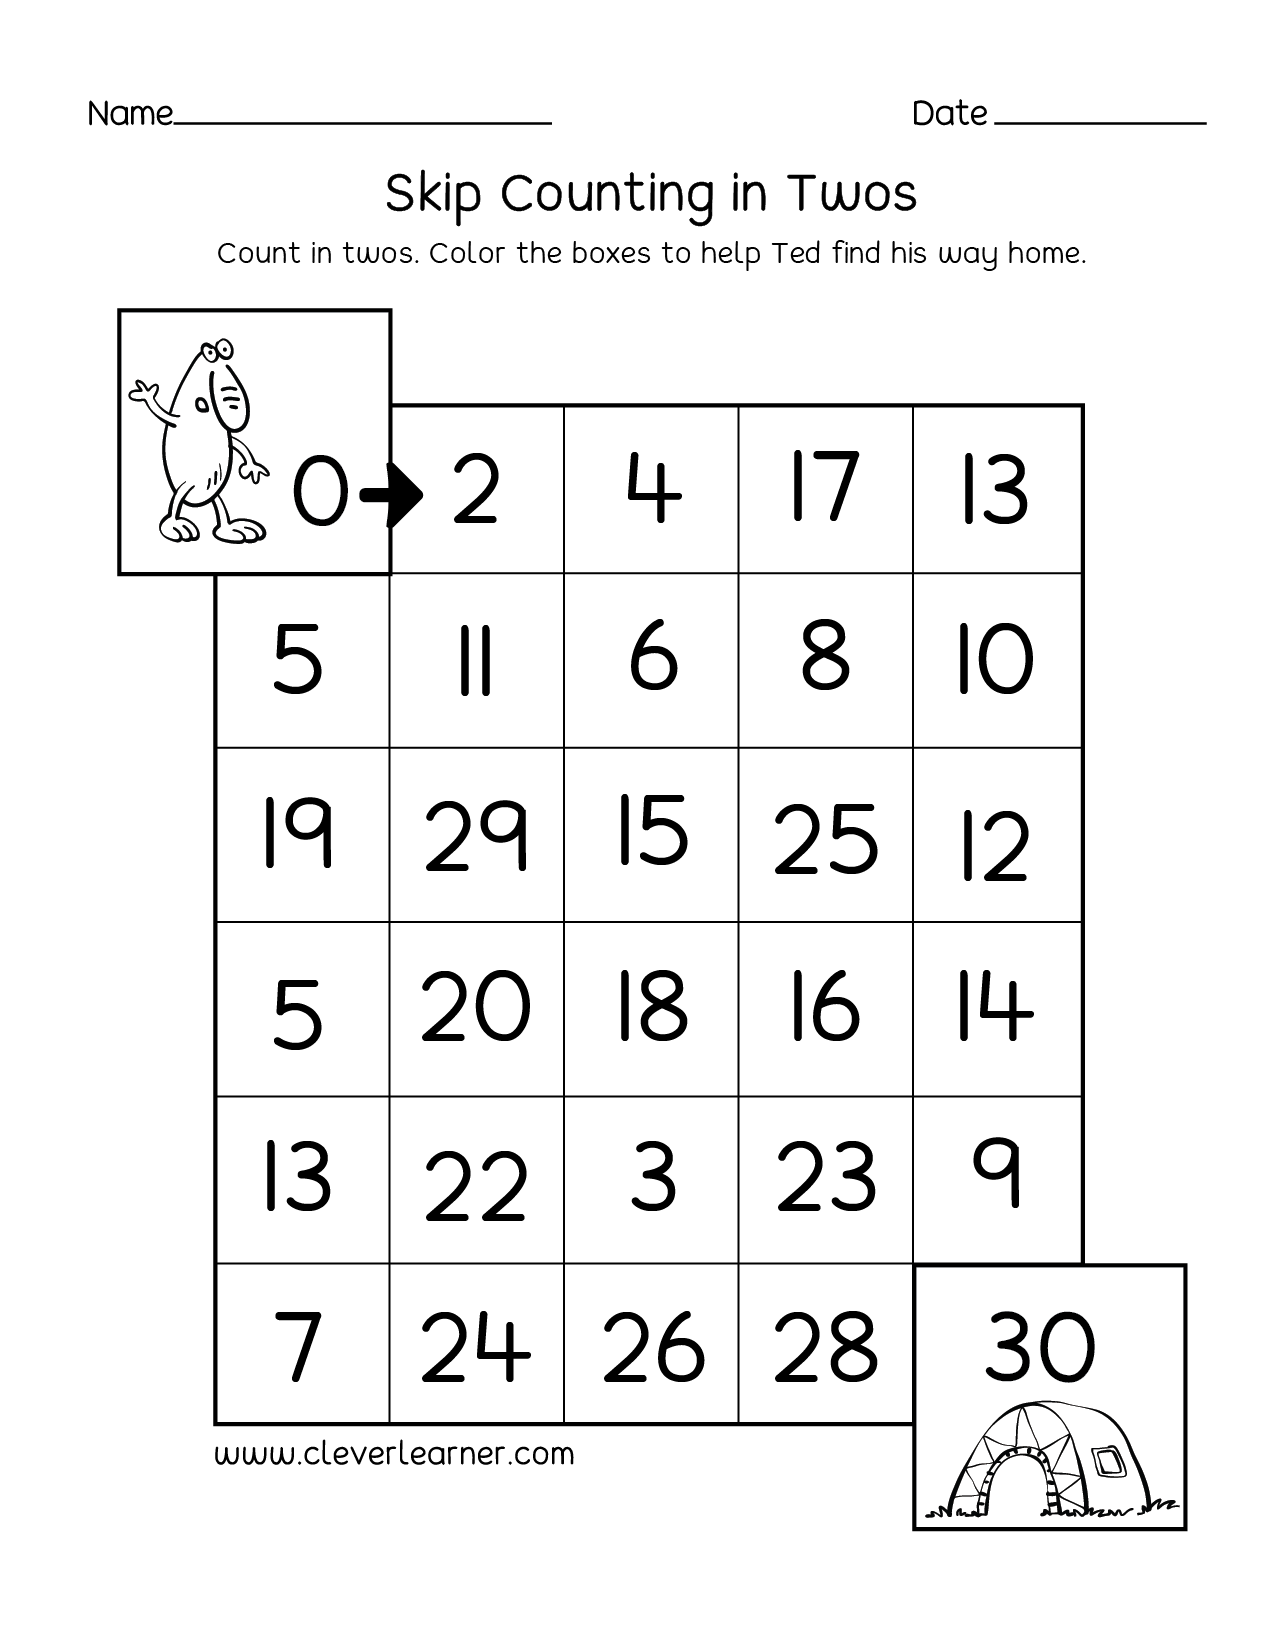 Skipping numbers activities and worksheets for kindergarten and first grade